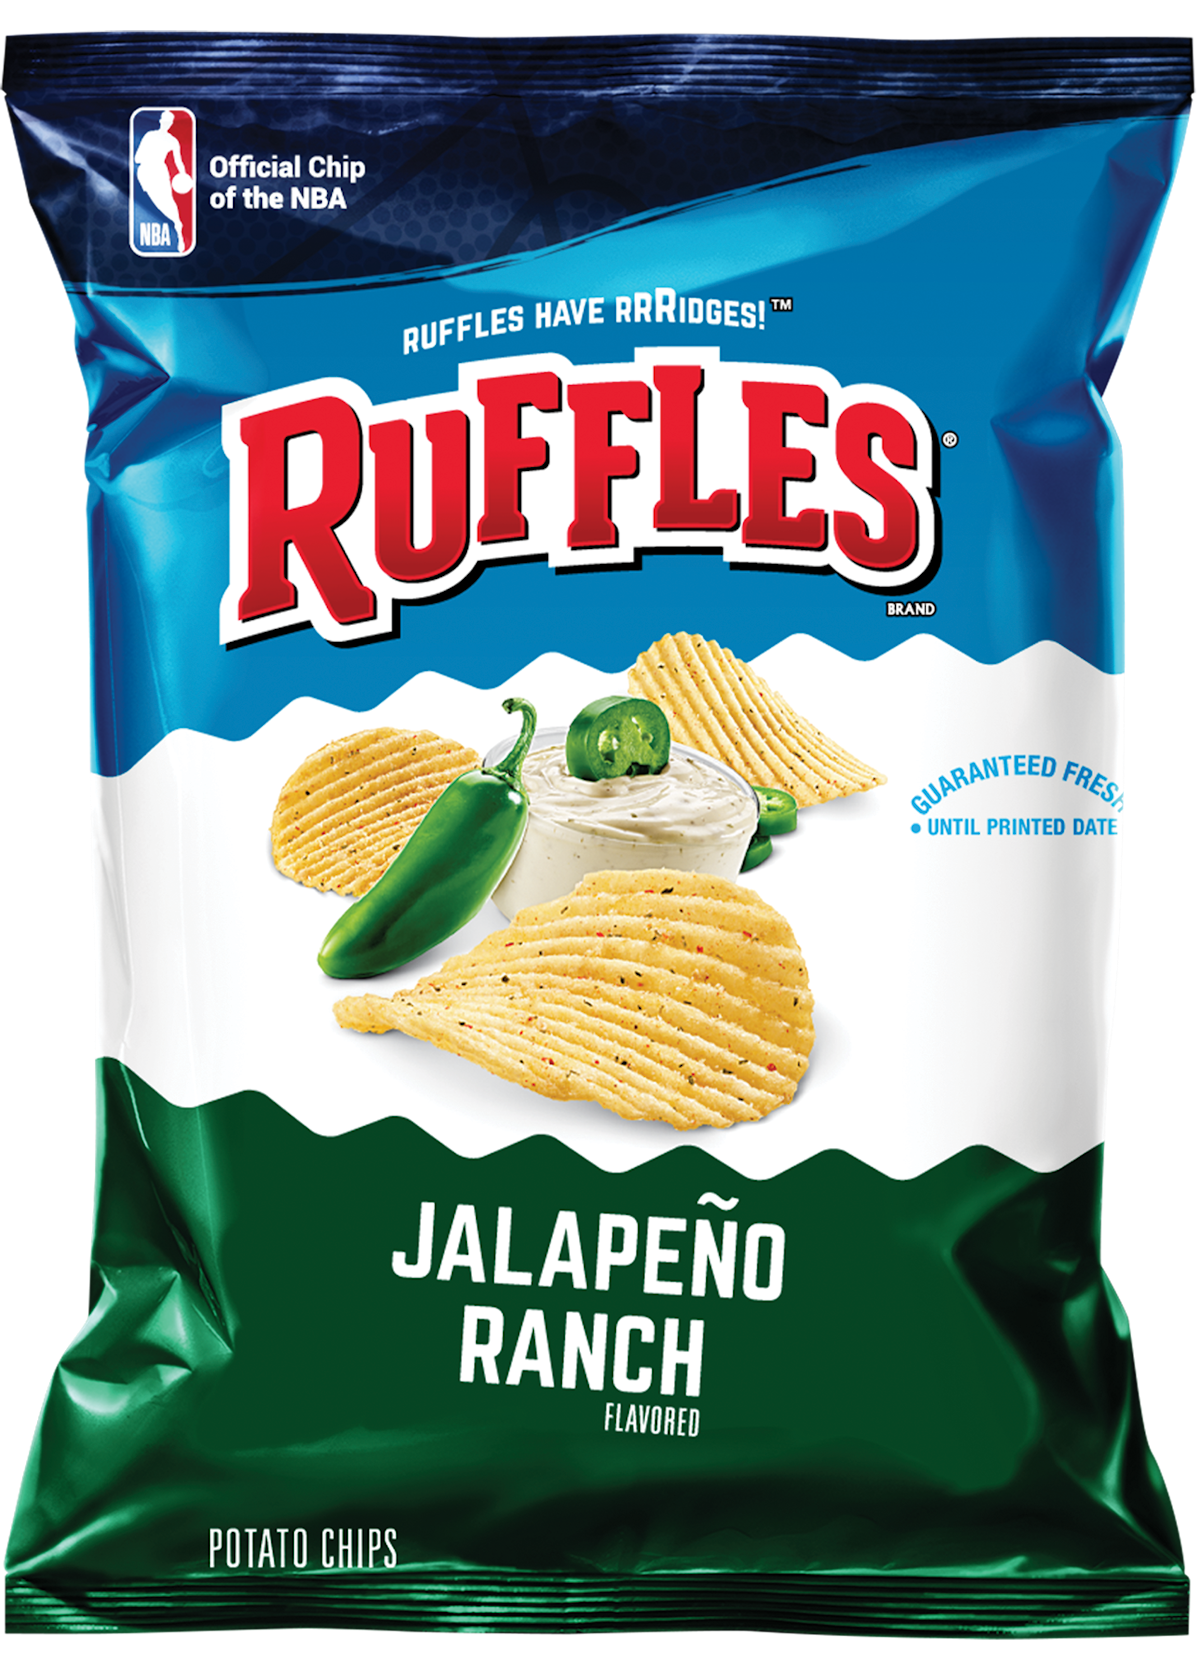 Ruffles Jalapeno Ranch Flavored Potato Chips From Pepsico Foodservice Vending Market Watch